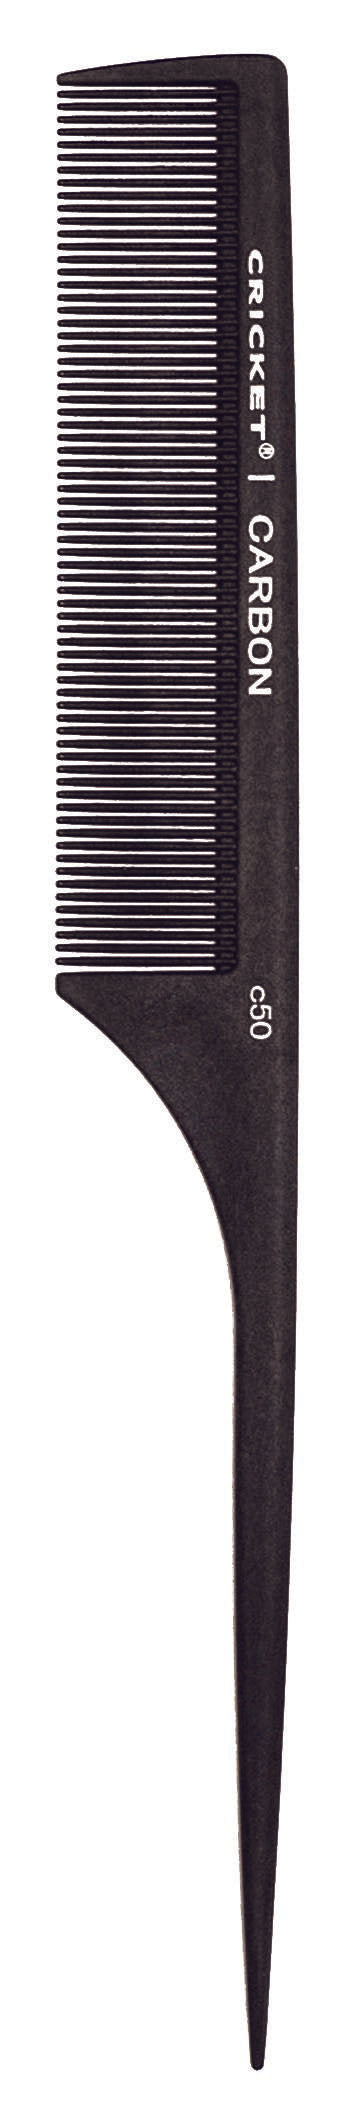 Cricket Carbon Comb C50 Fine Toothed Rattail Comb